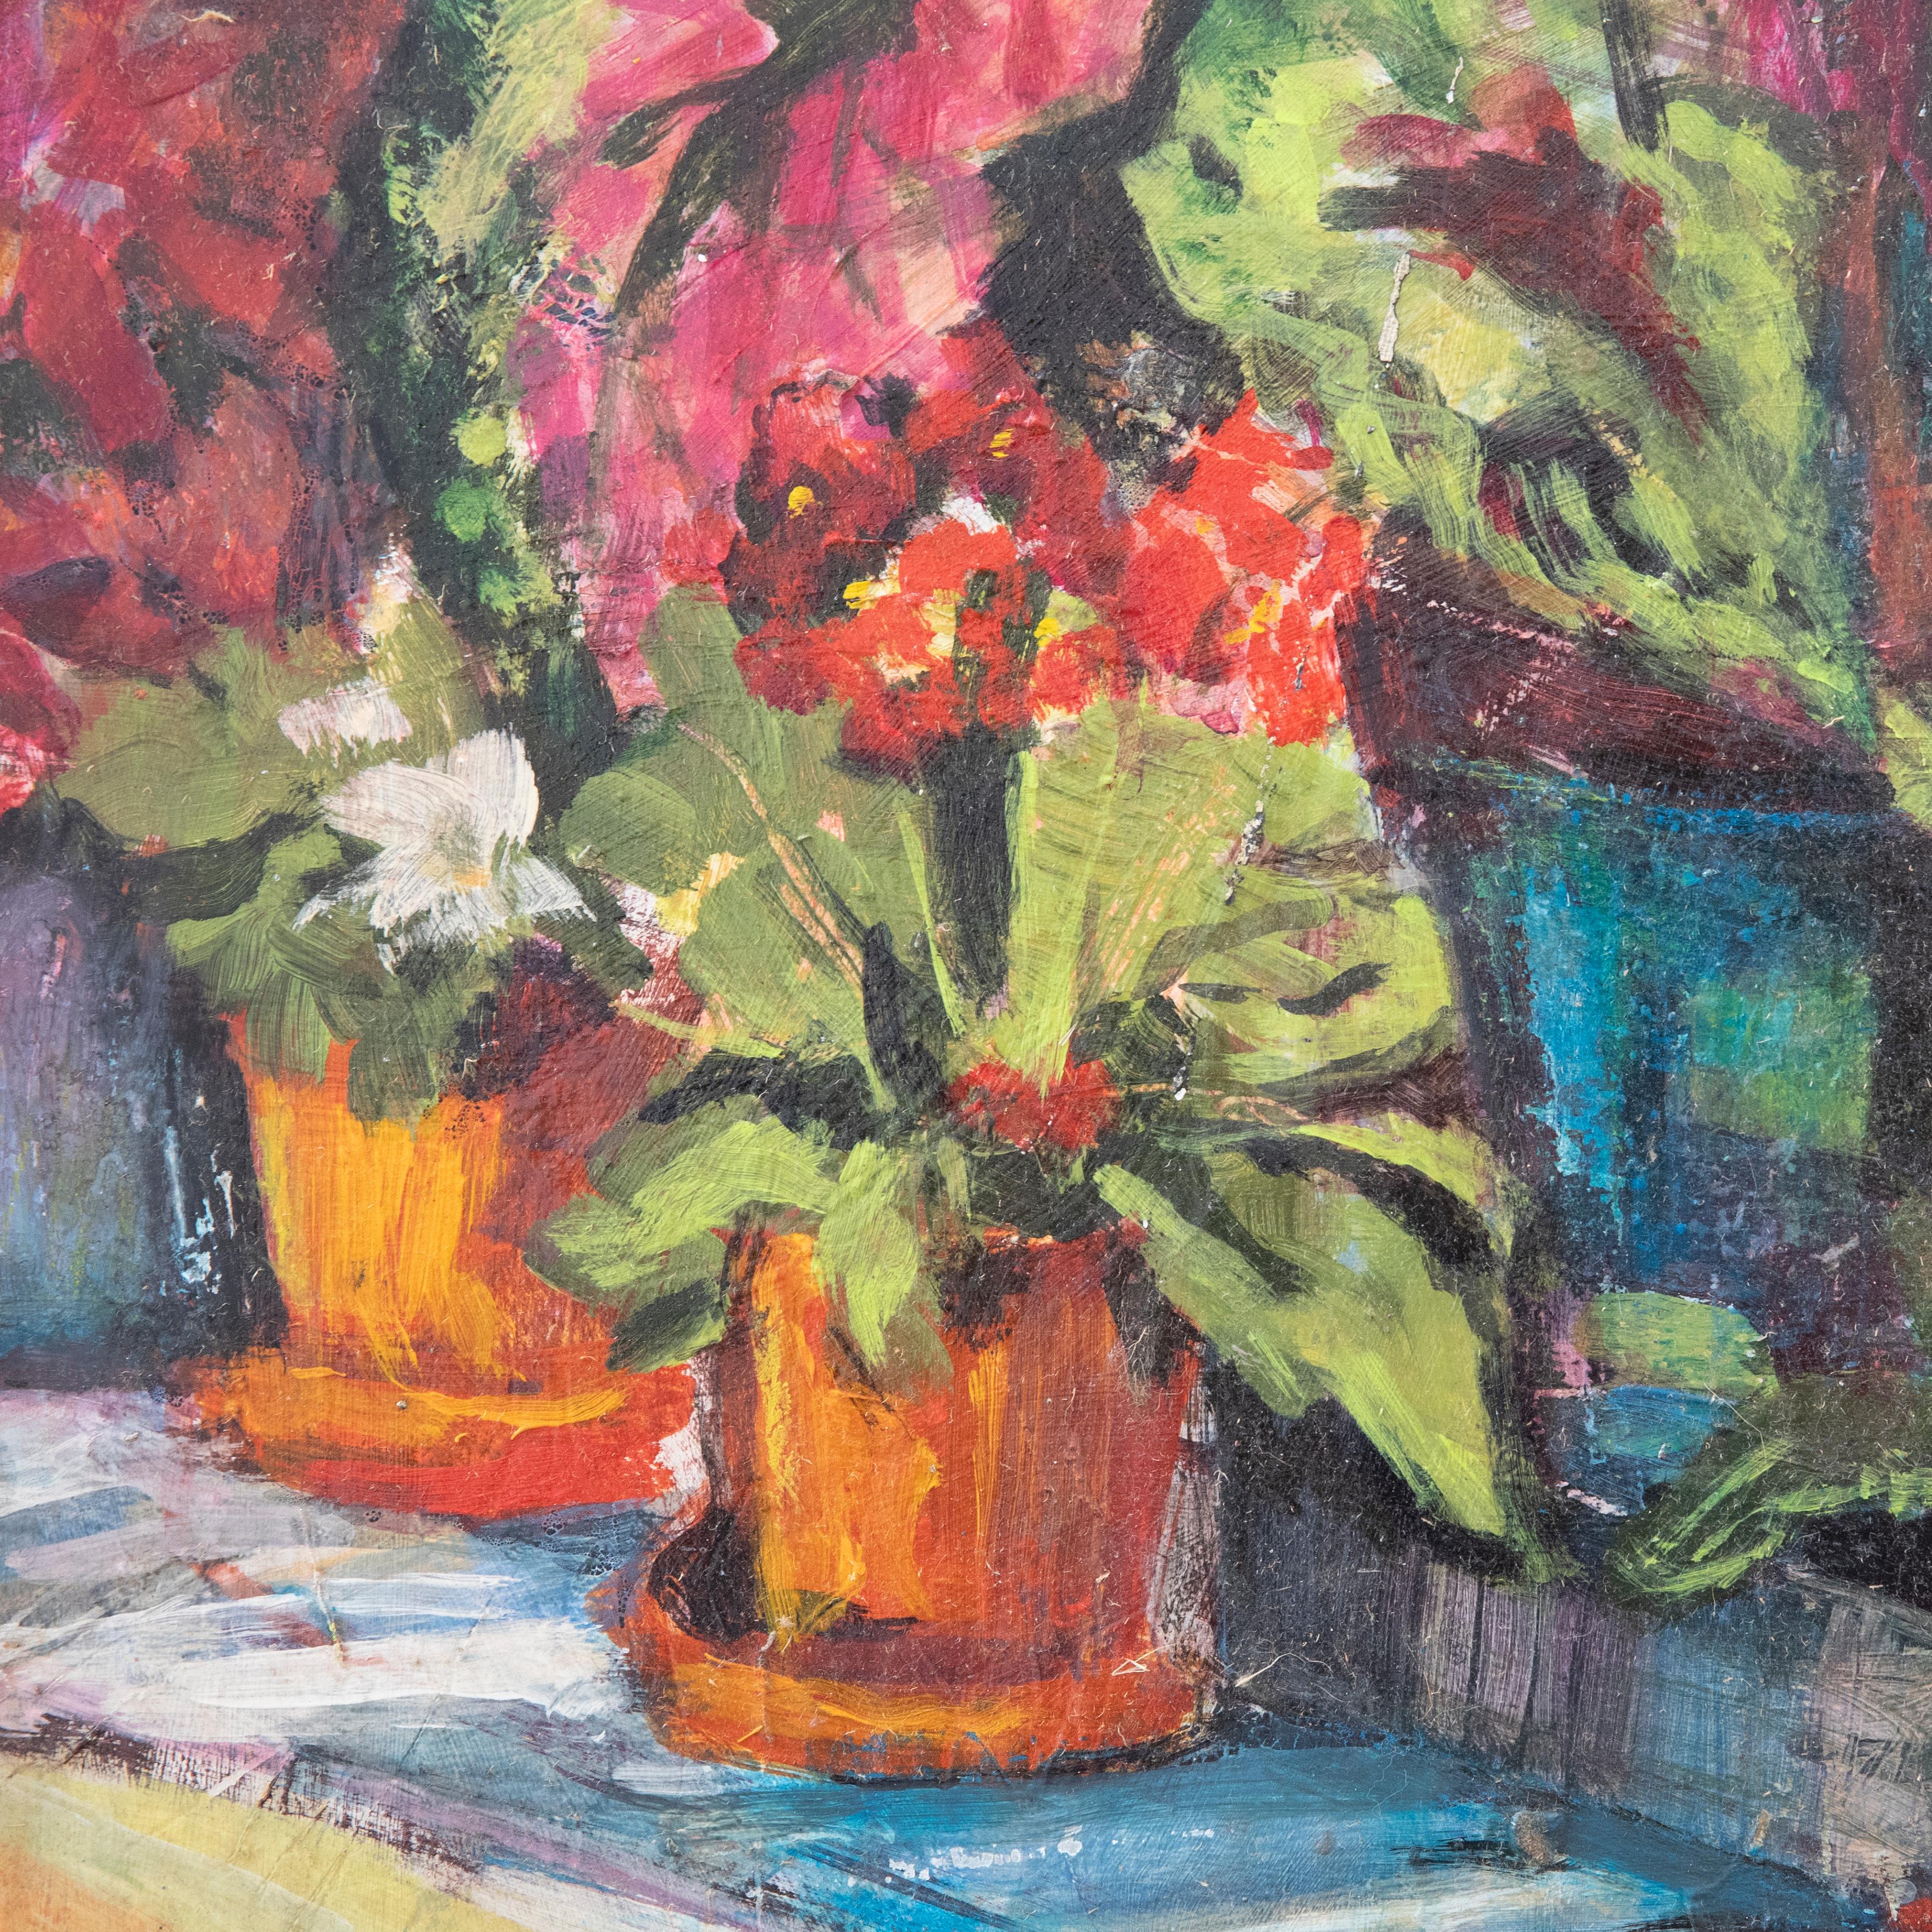 This expressive and colourful still life shows an array of potted house plants position on a sunny table top. A large indoor begonia dominates and droops in the centre of the display, behind several joyful primroses in terracotta pots. The oil has